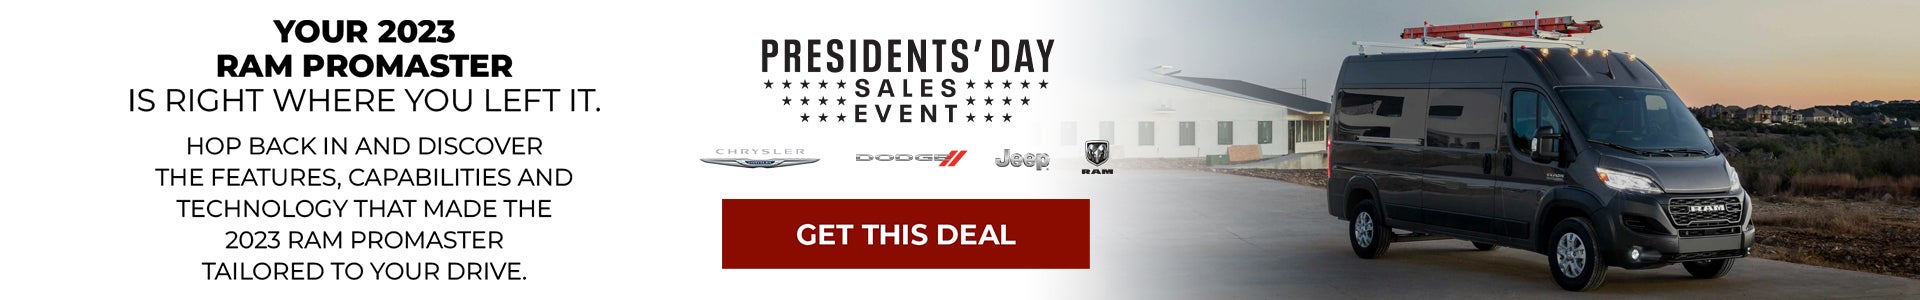 Presidents Day Sales Event 